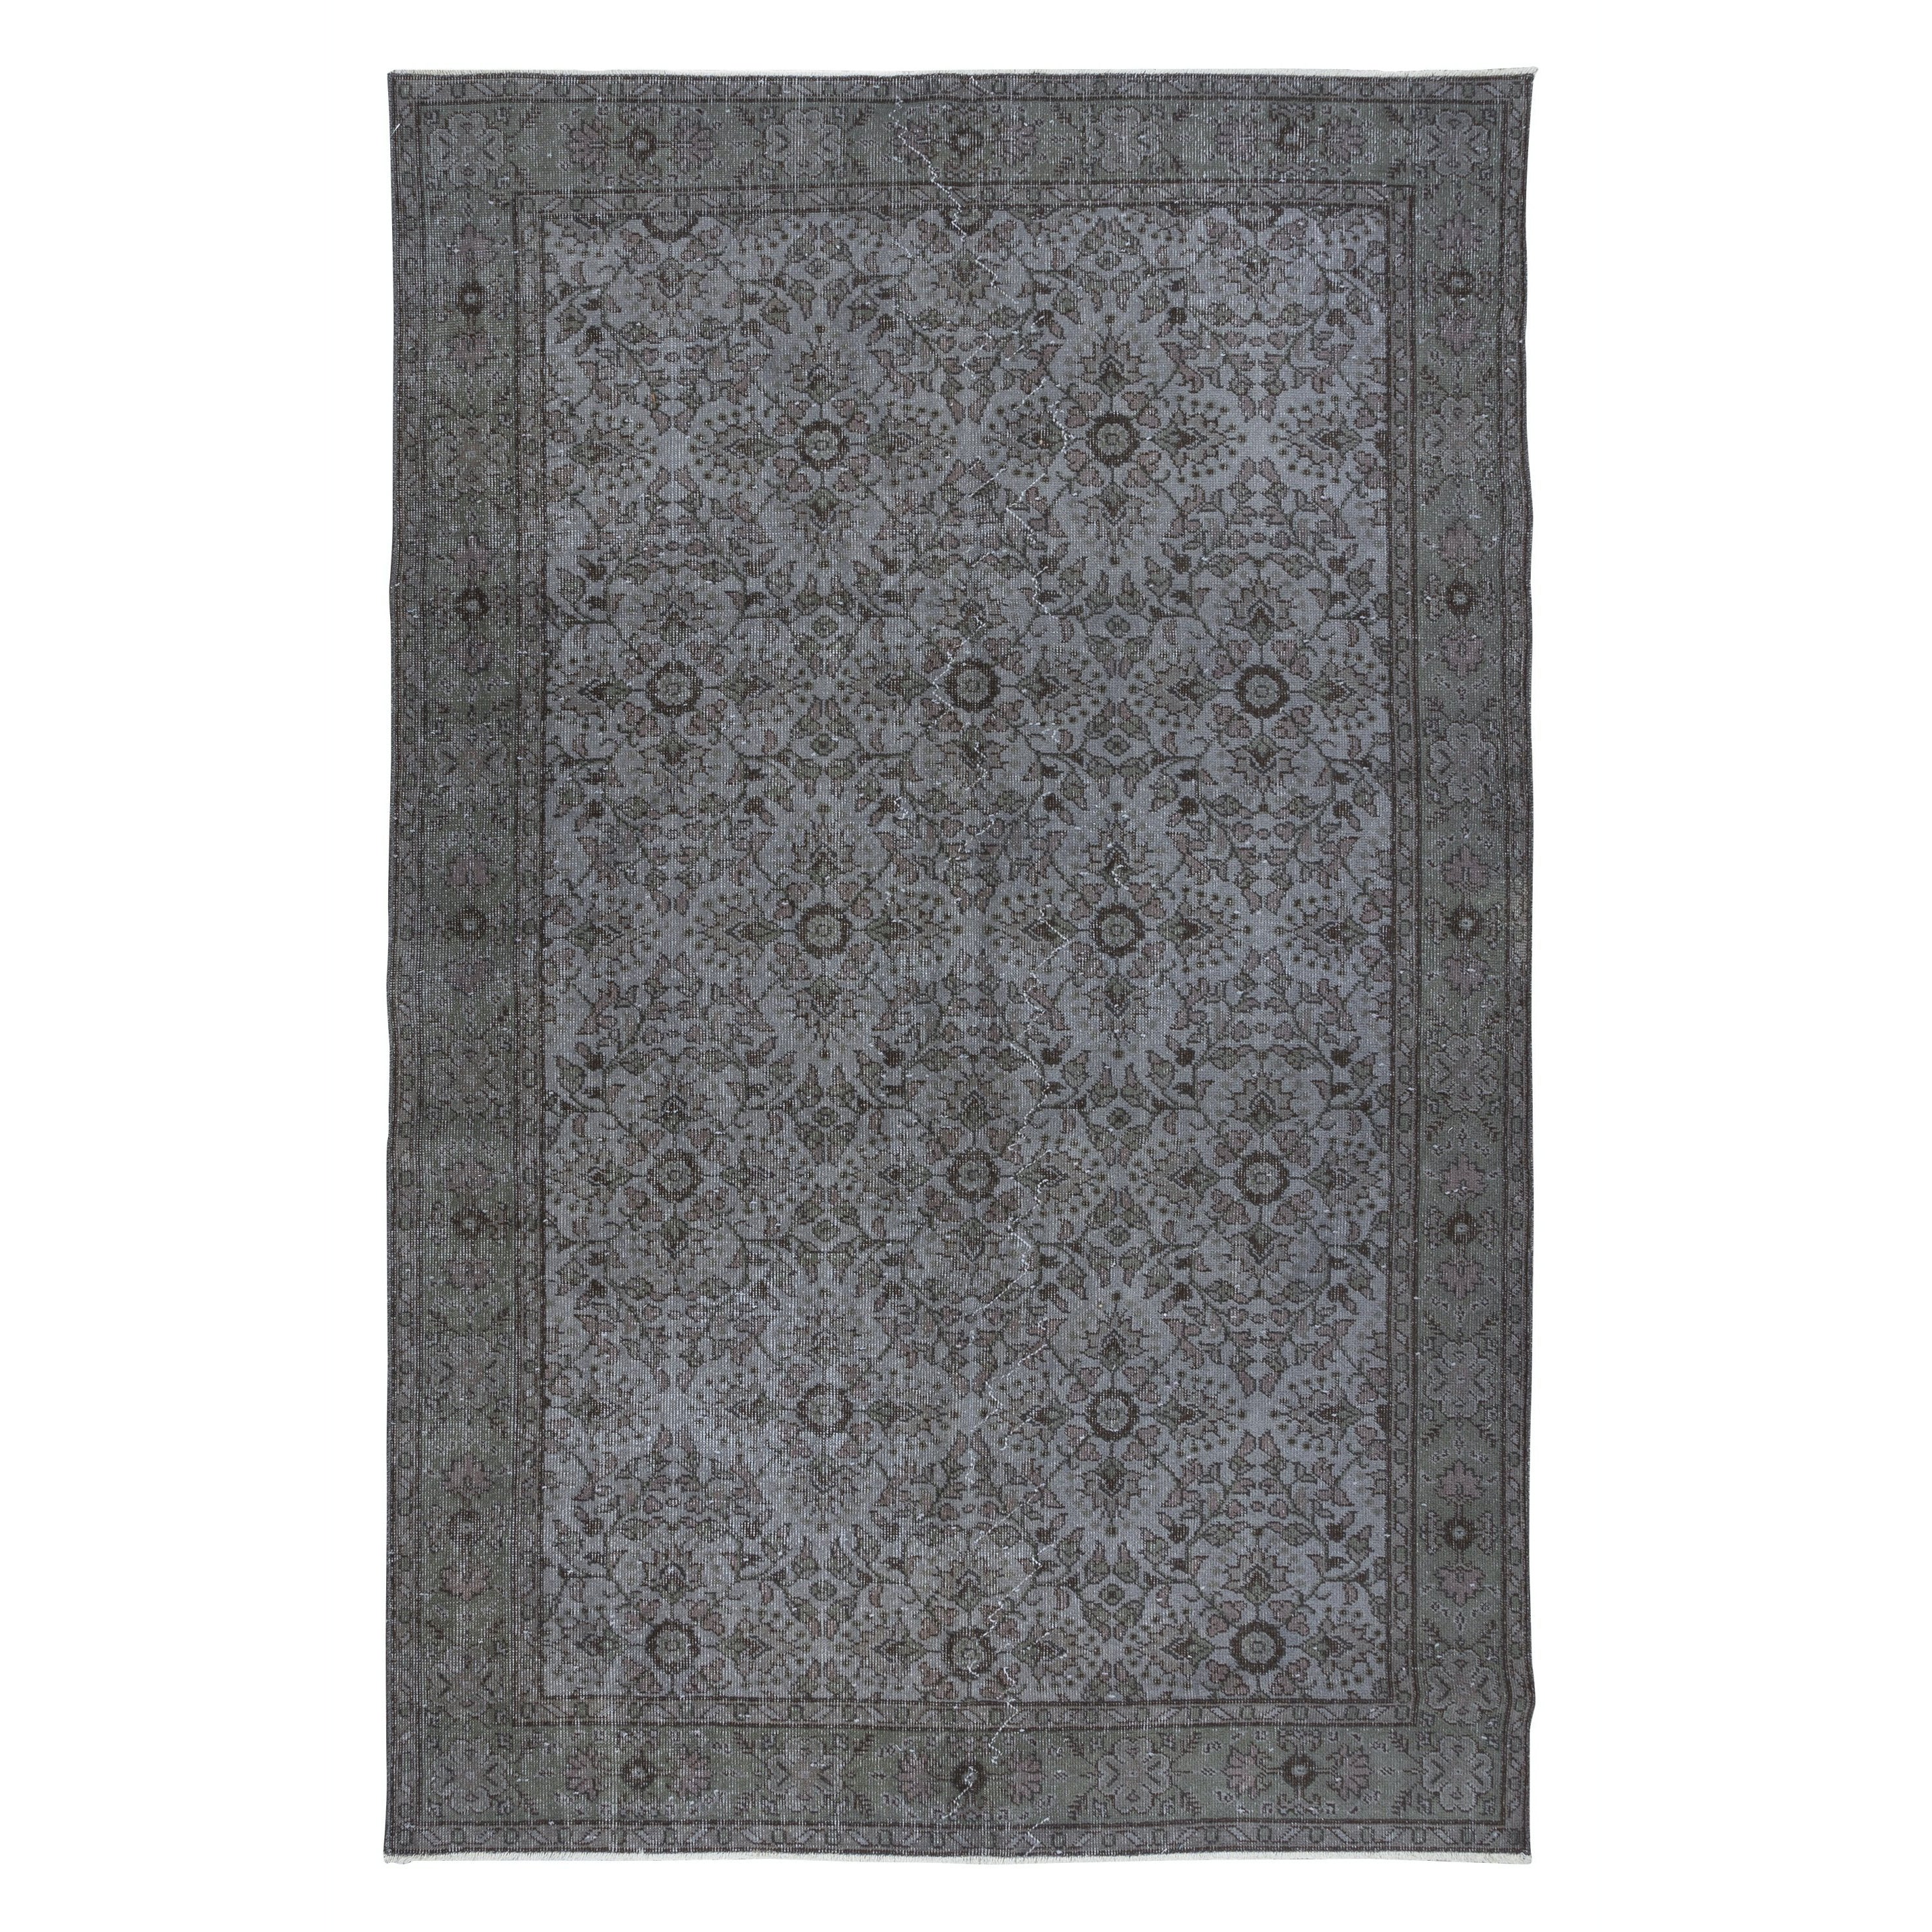 6x9.4 Ft Upcycled Handmade Area Rug in Gray, Contemporary Turkish Carpet For Sale